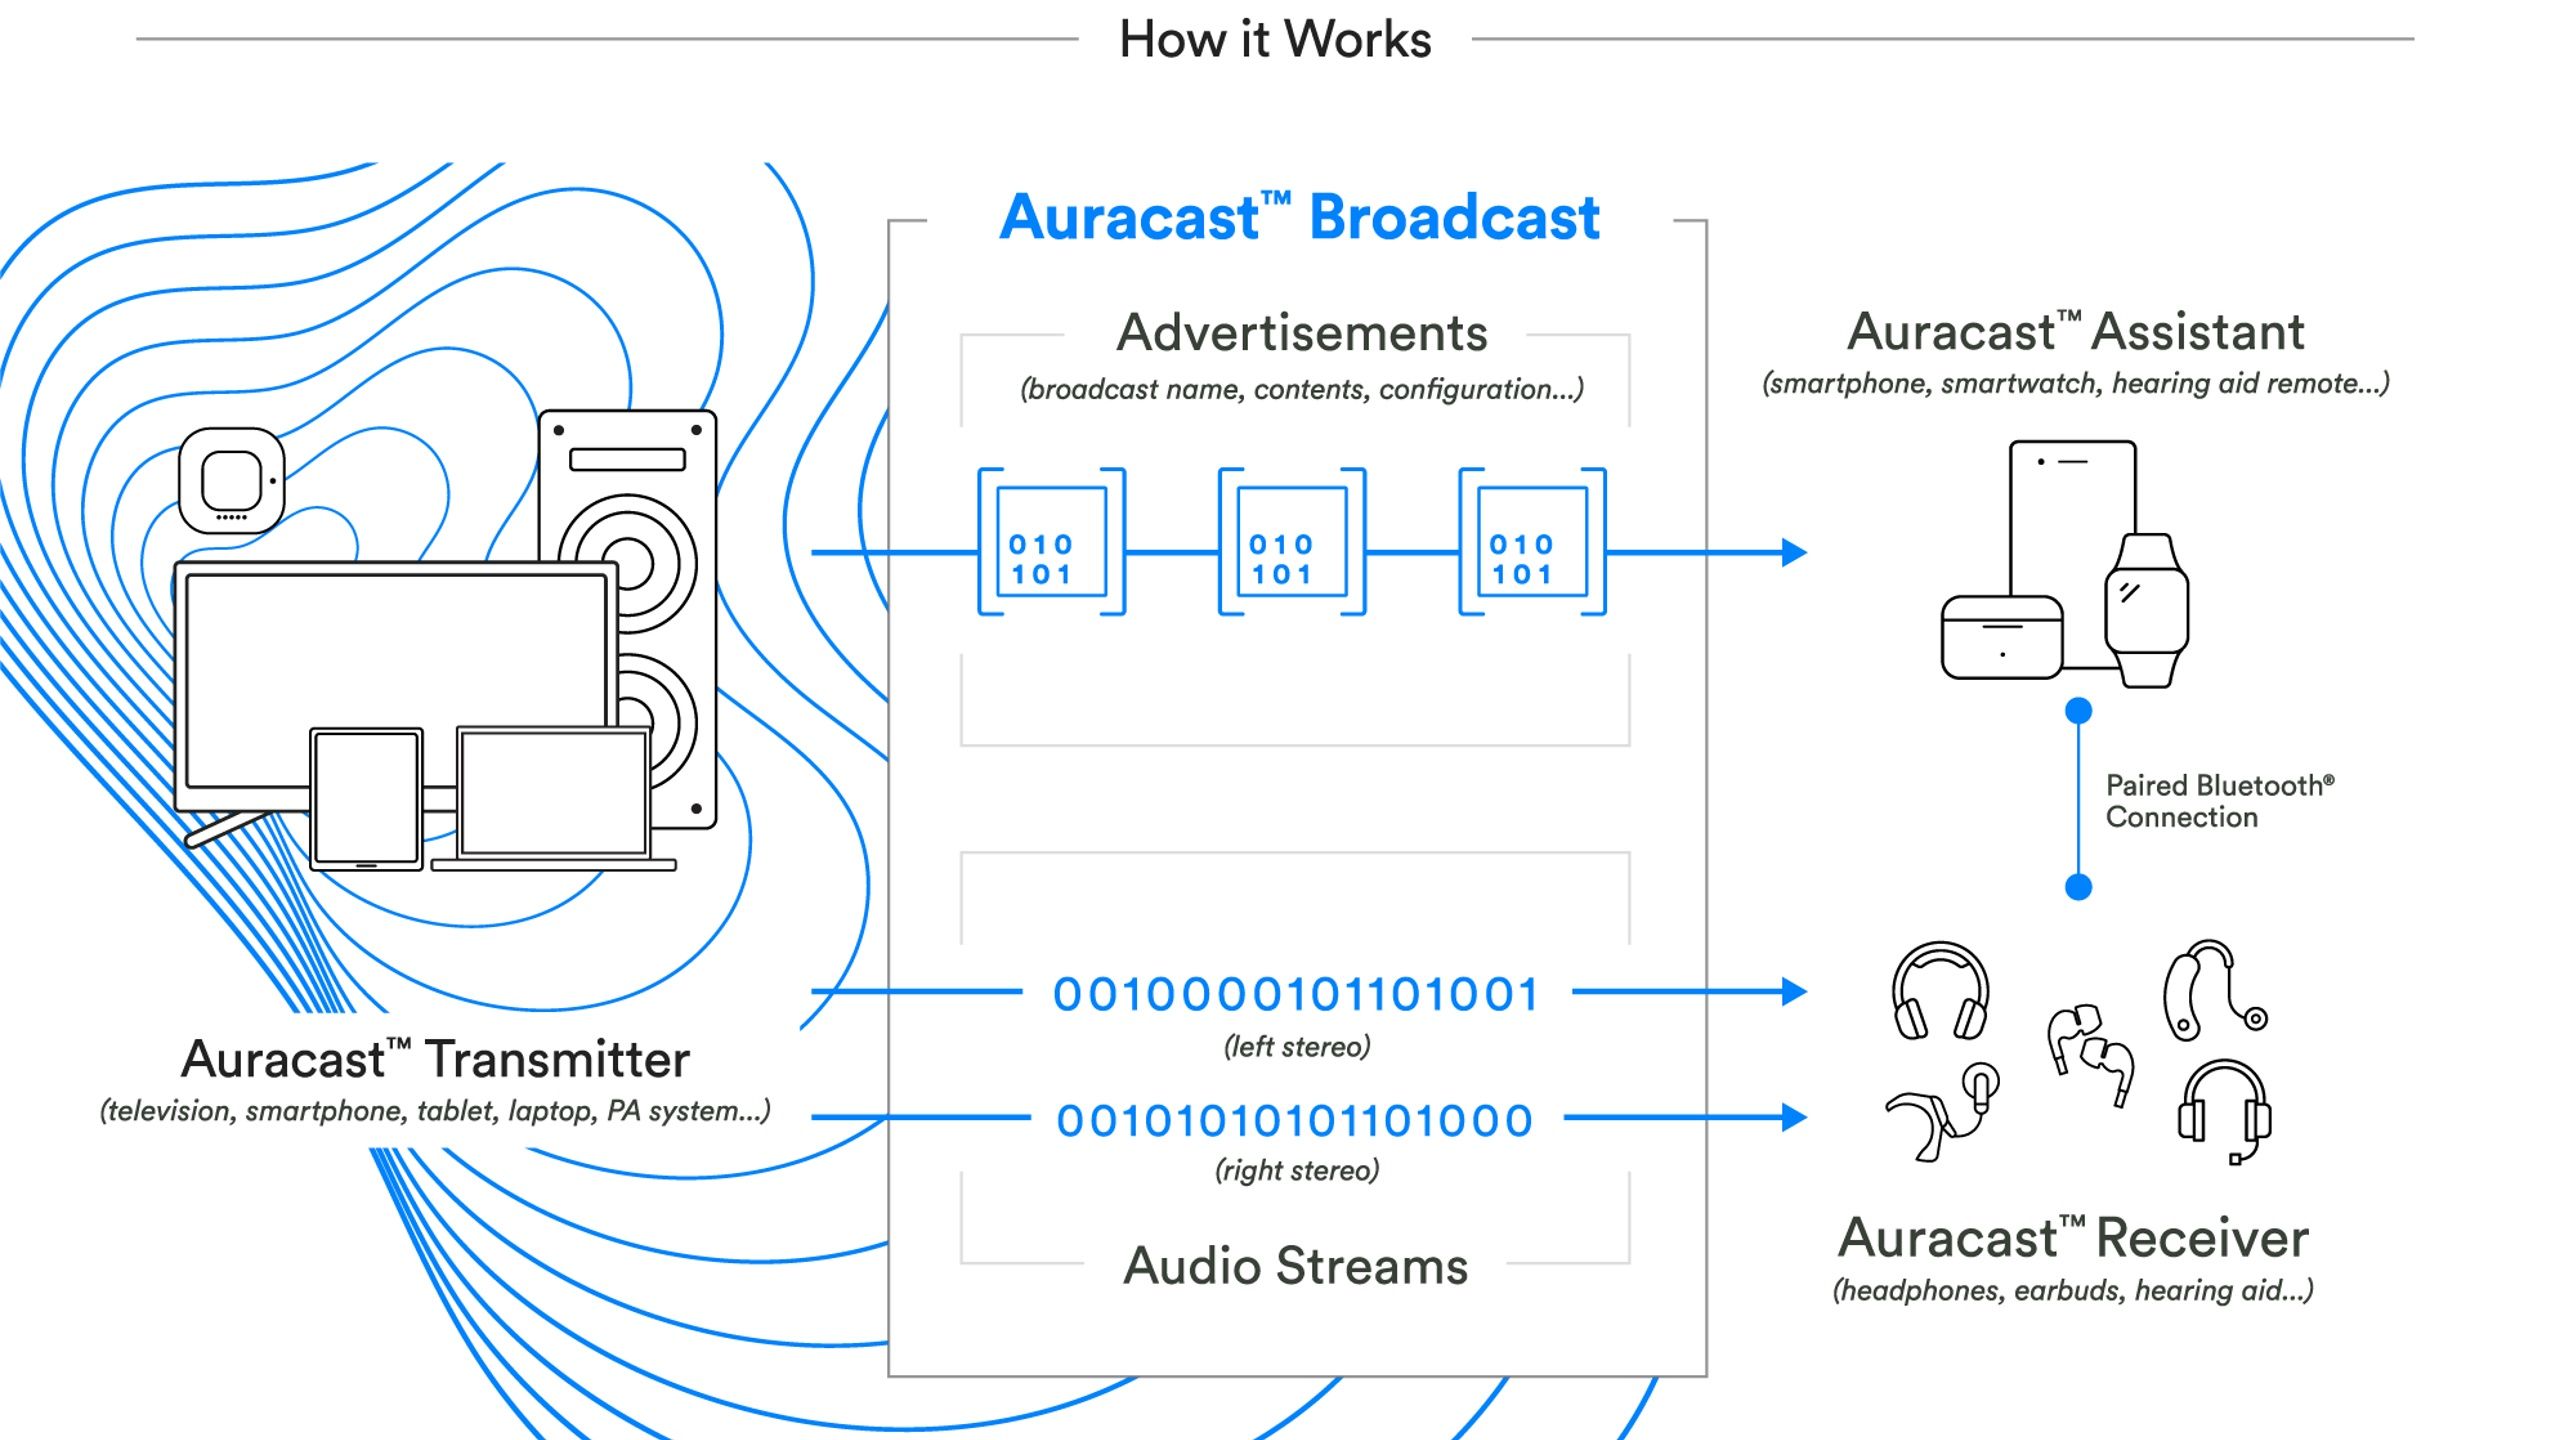 Auracast transmitters broadcast advertisements to a user's host device. The host device selects a stream, passes the access key to its connected audio accessory, and the accessory starts interacting with the actual content stream.